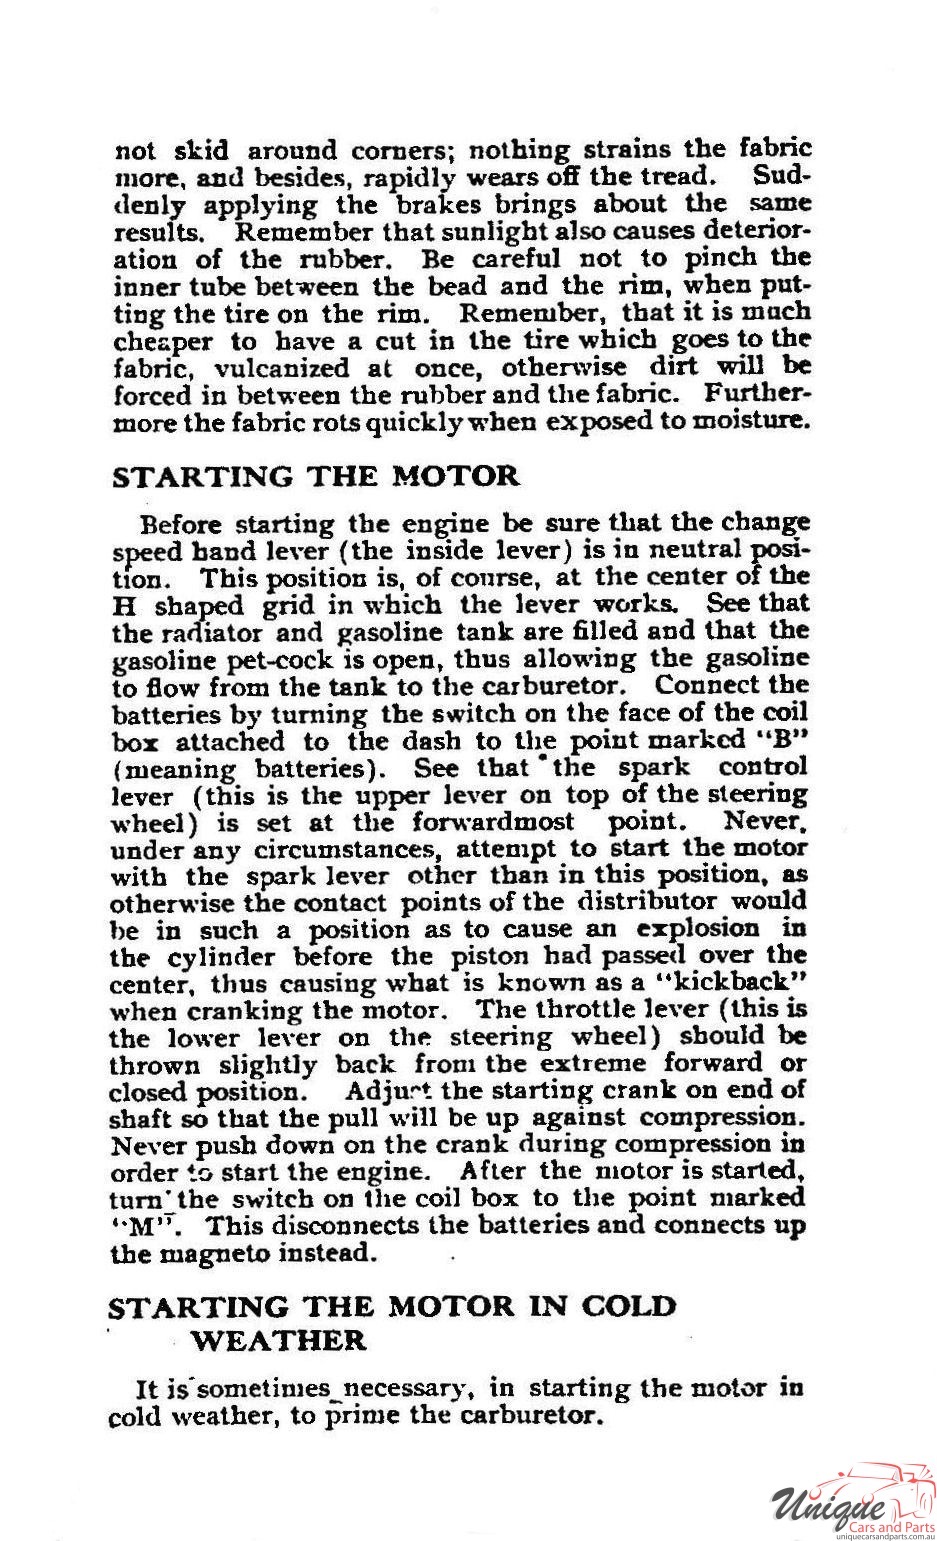 1910 Buick Model 14 Operating Instructions Page 2